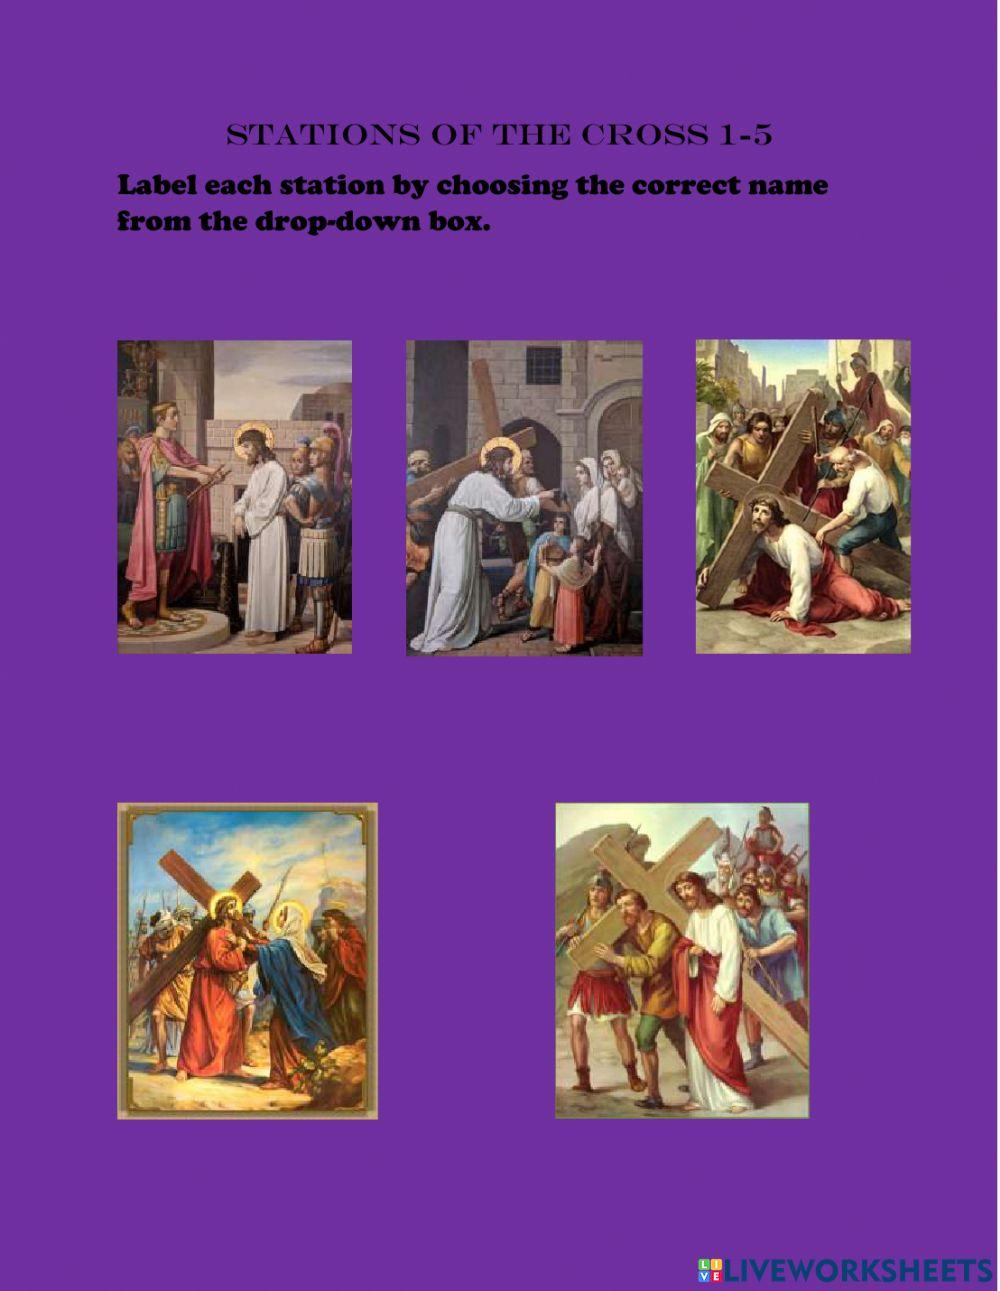 Stations of the cross 1-5